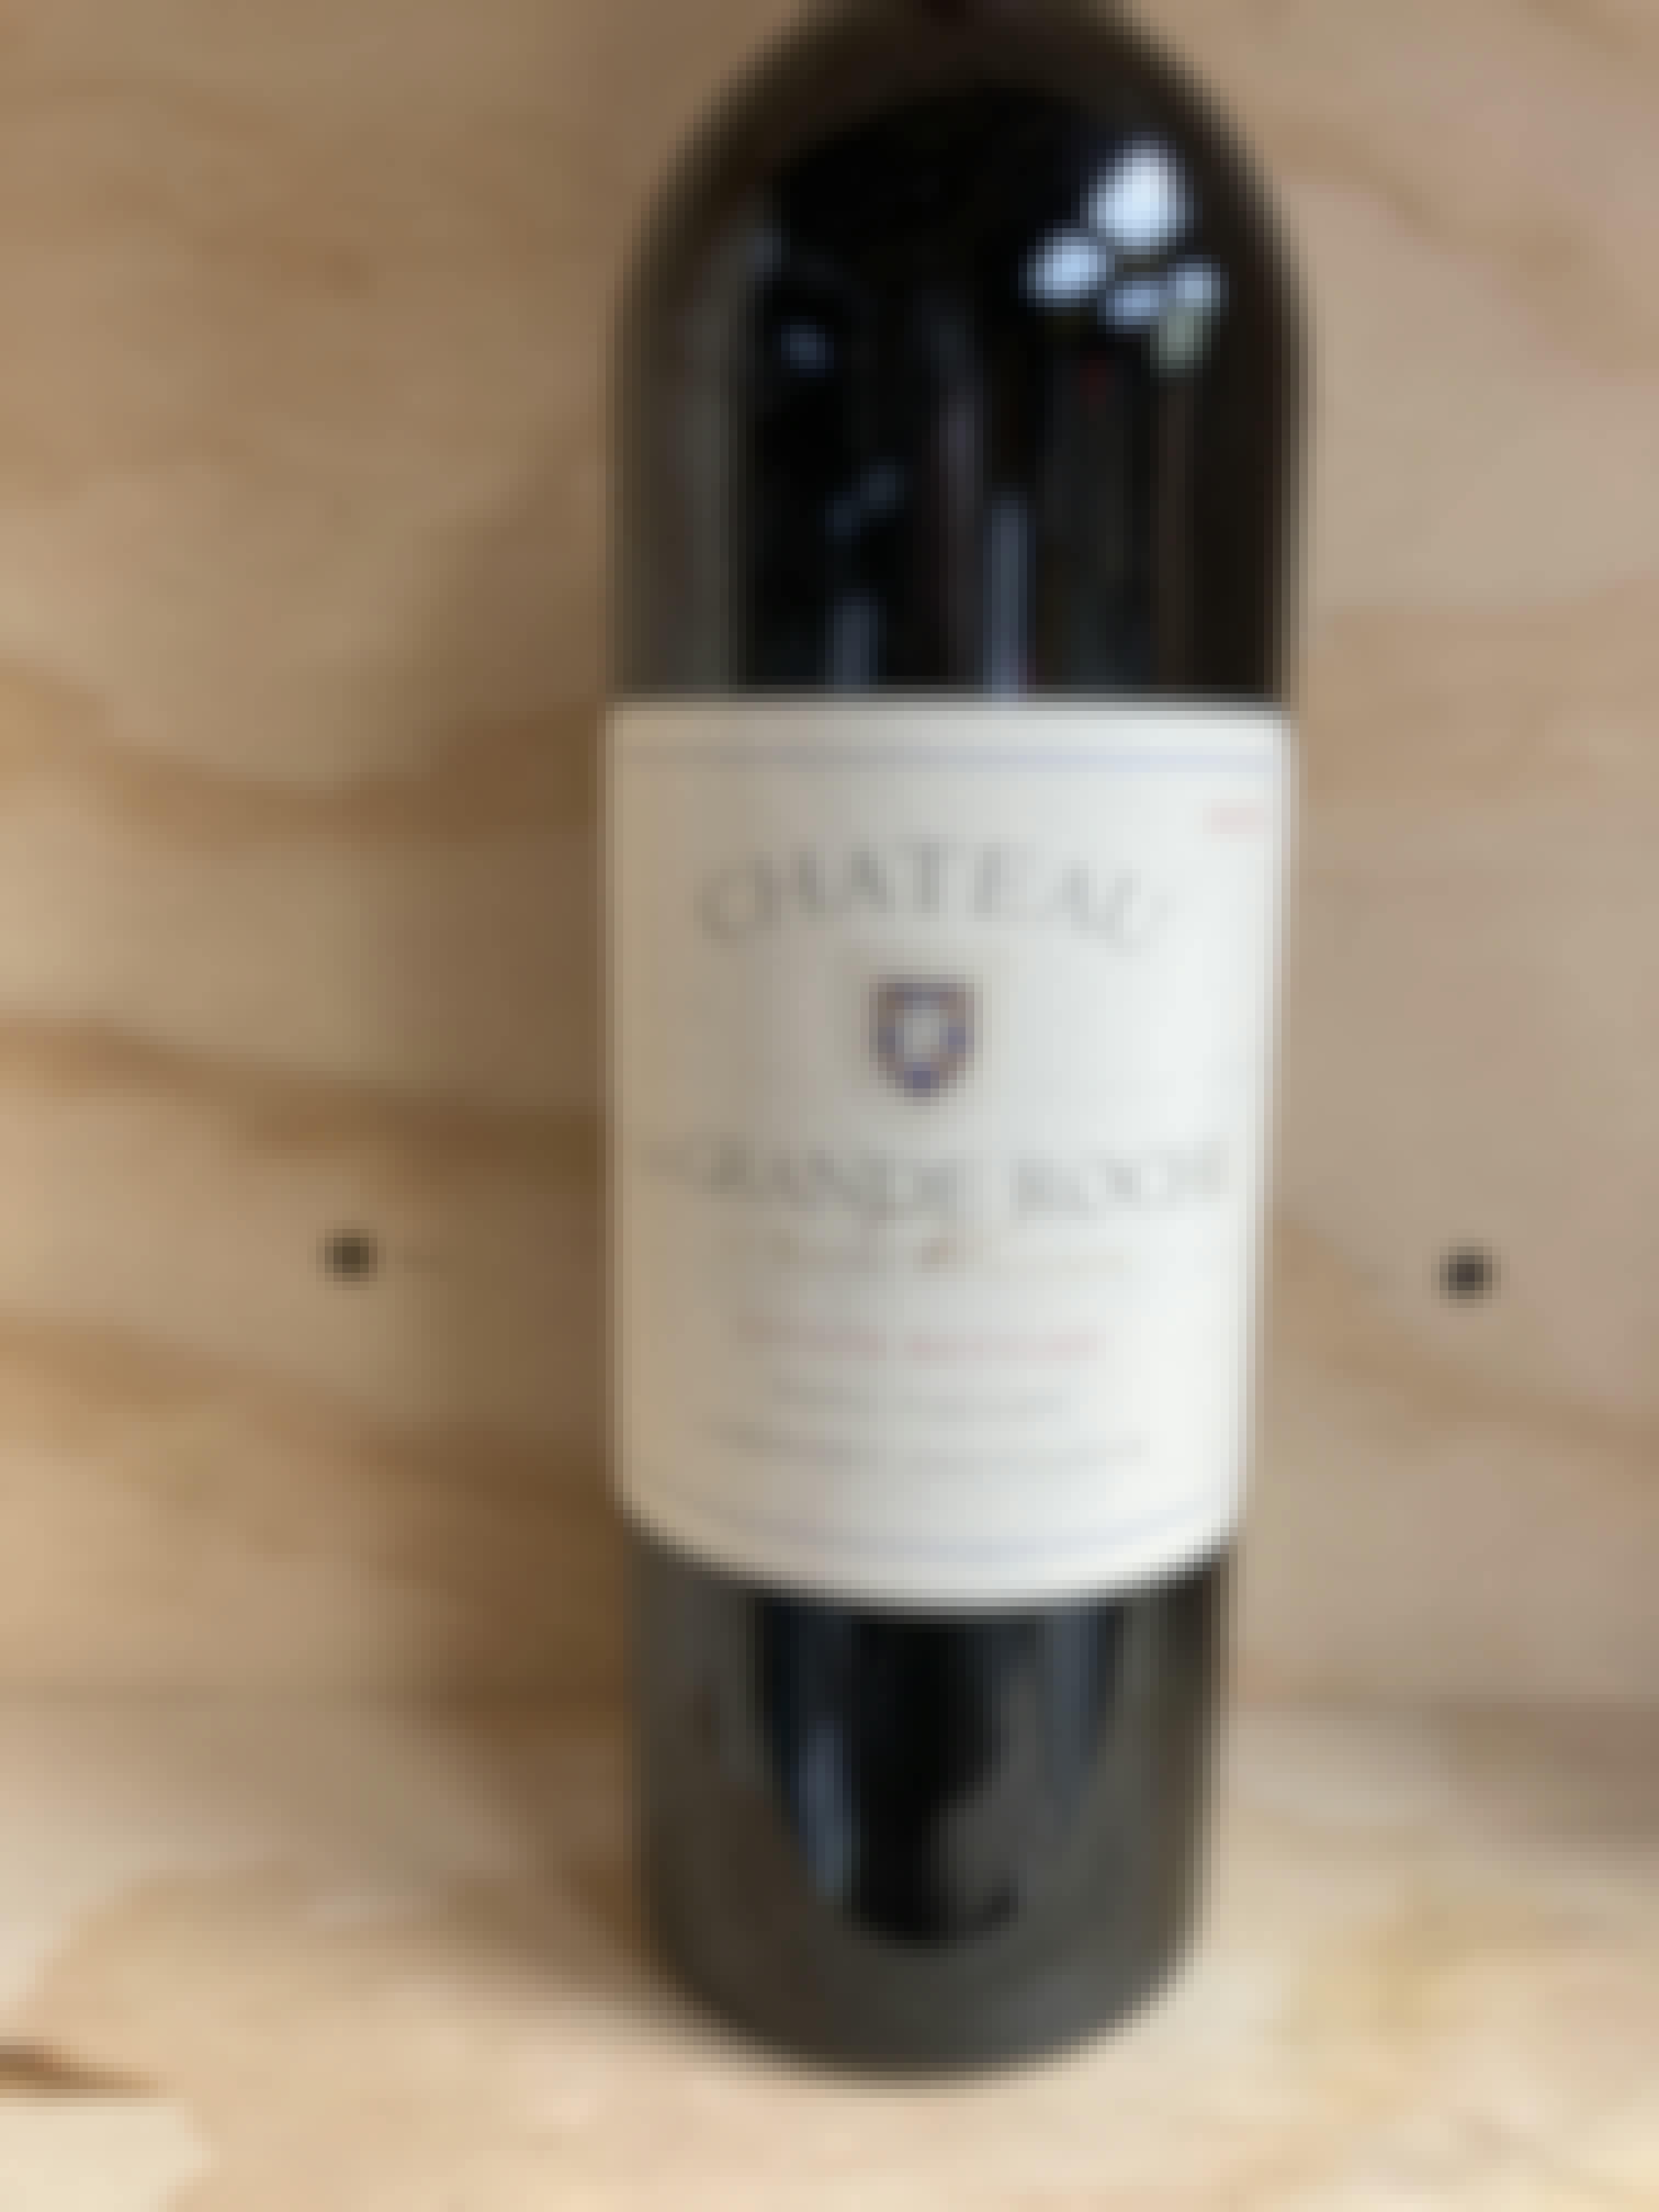 Wine - France - Bordeaux to Enthusiast - Franey $50 Domaine - $25 Wine 